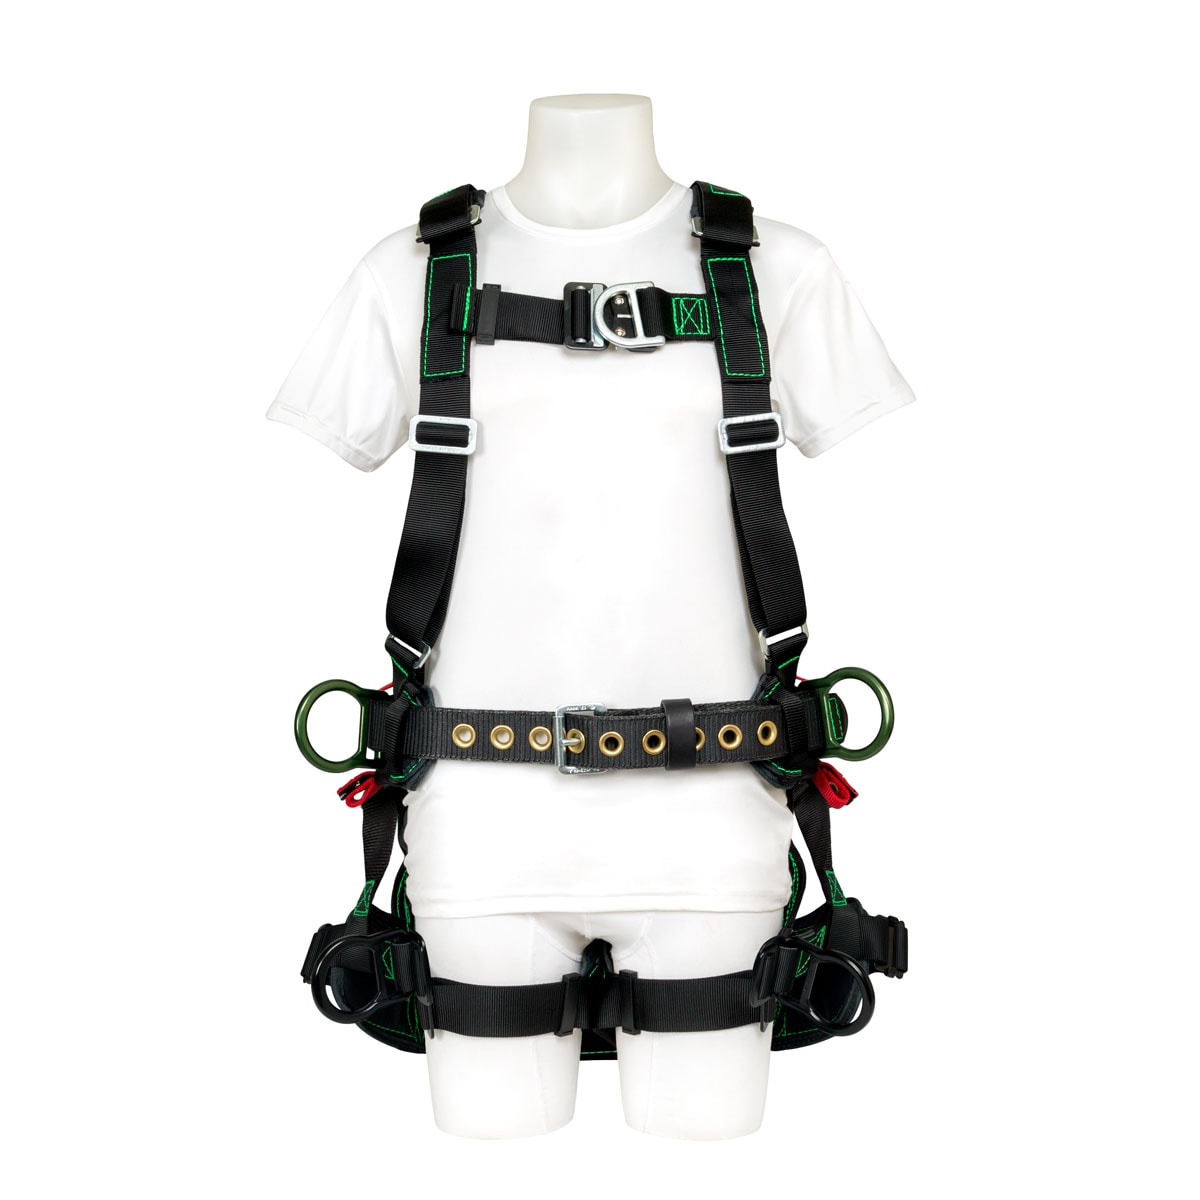 Buckingham 68K966 BuckTech Tower Harness from GME Supply